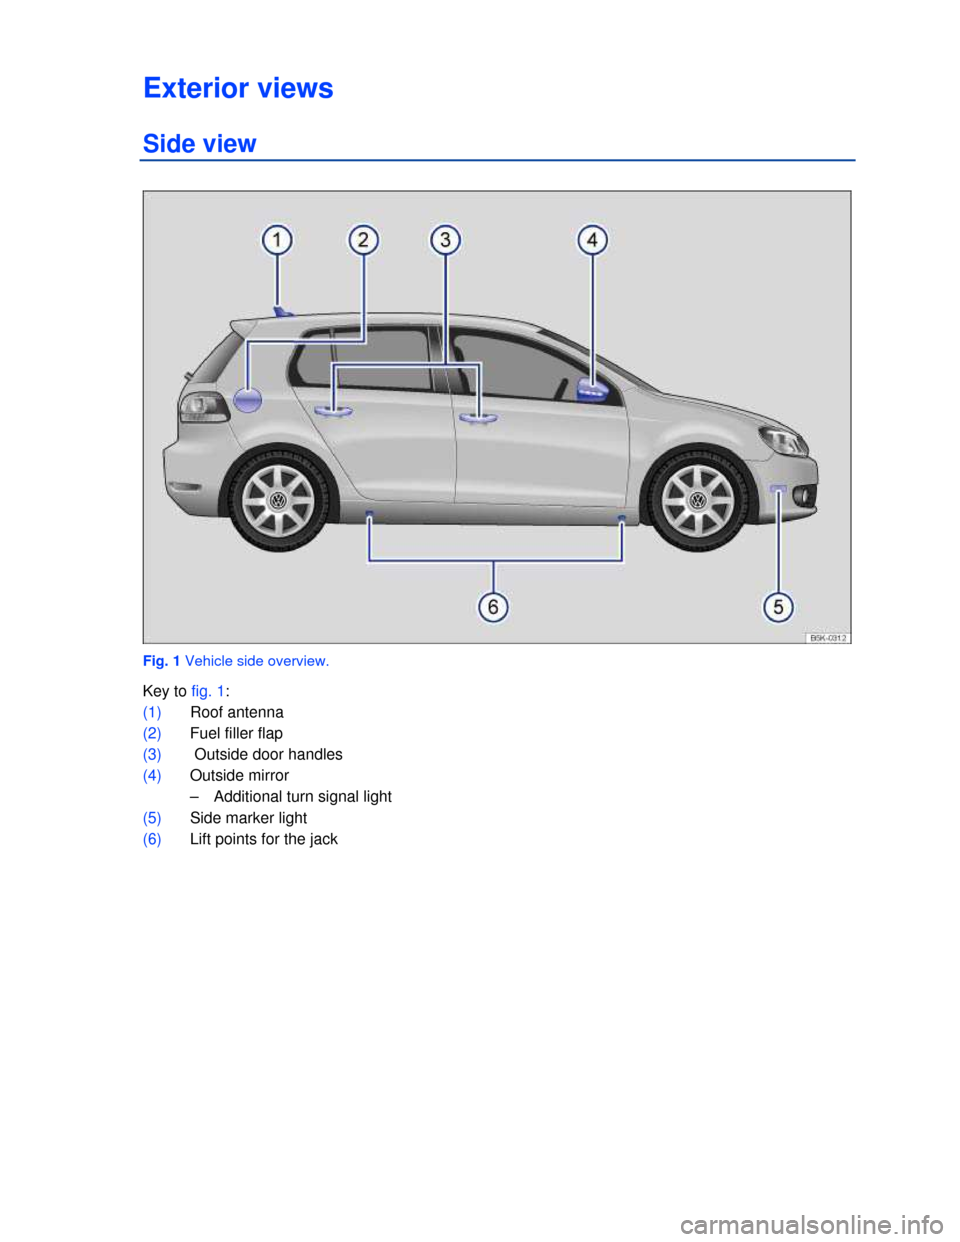 VOLKSWAGEN GOLF 2013 5G / 7.G Owners Manual  
 
Exterior views 
Side view 
 
Fig. 1 Vehicle side overview. 
Key to fig. 1: 
(1) Roof antenna  
(2) Fuel filler flap  
(3)  Outside door handles  
(4) Outside mirror  
–  Additional turn signal l